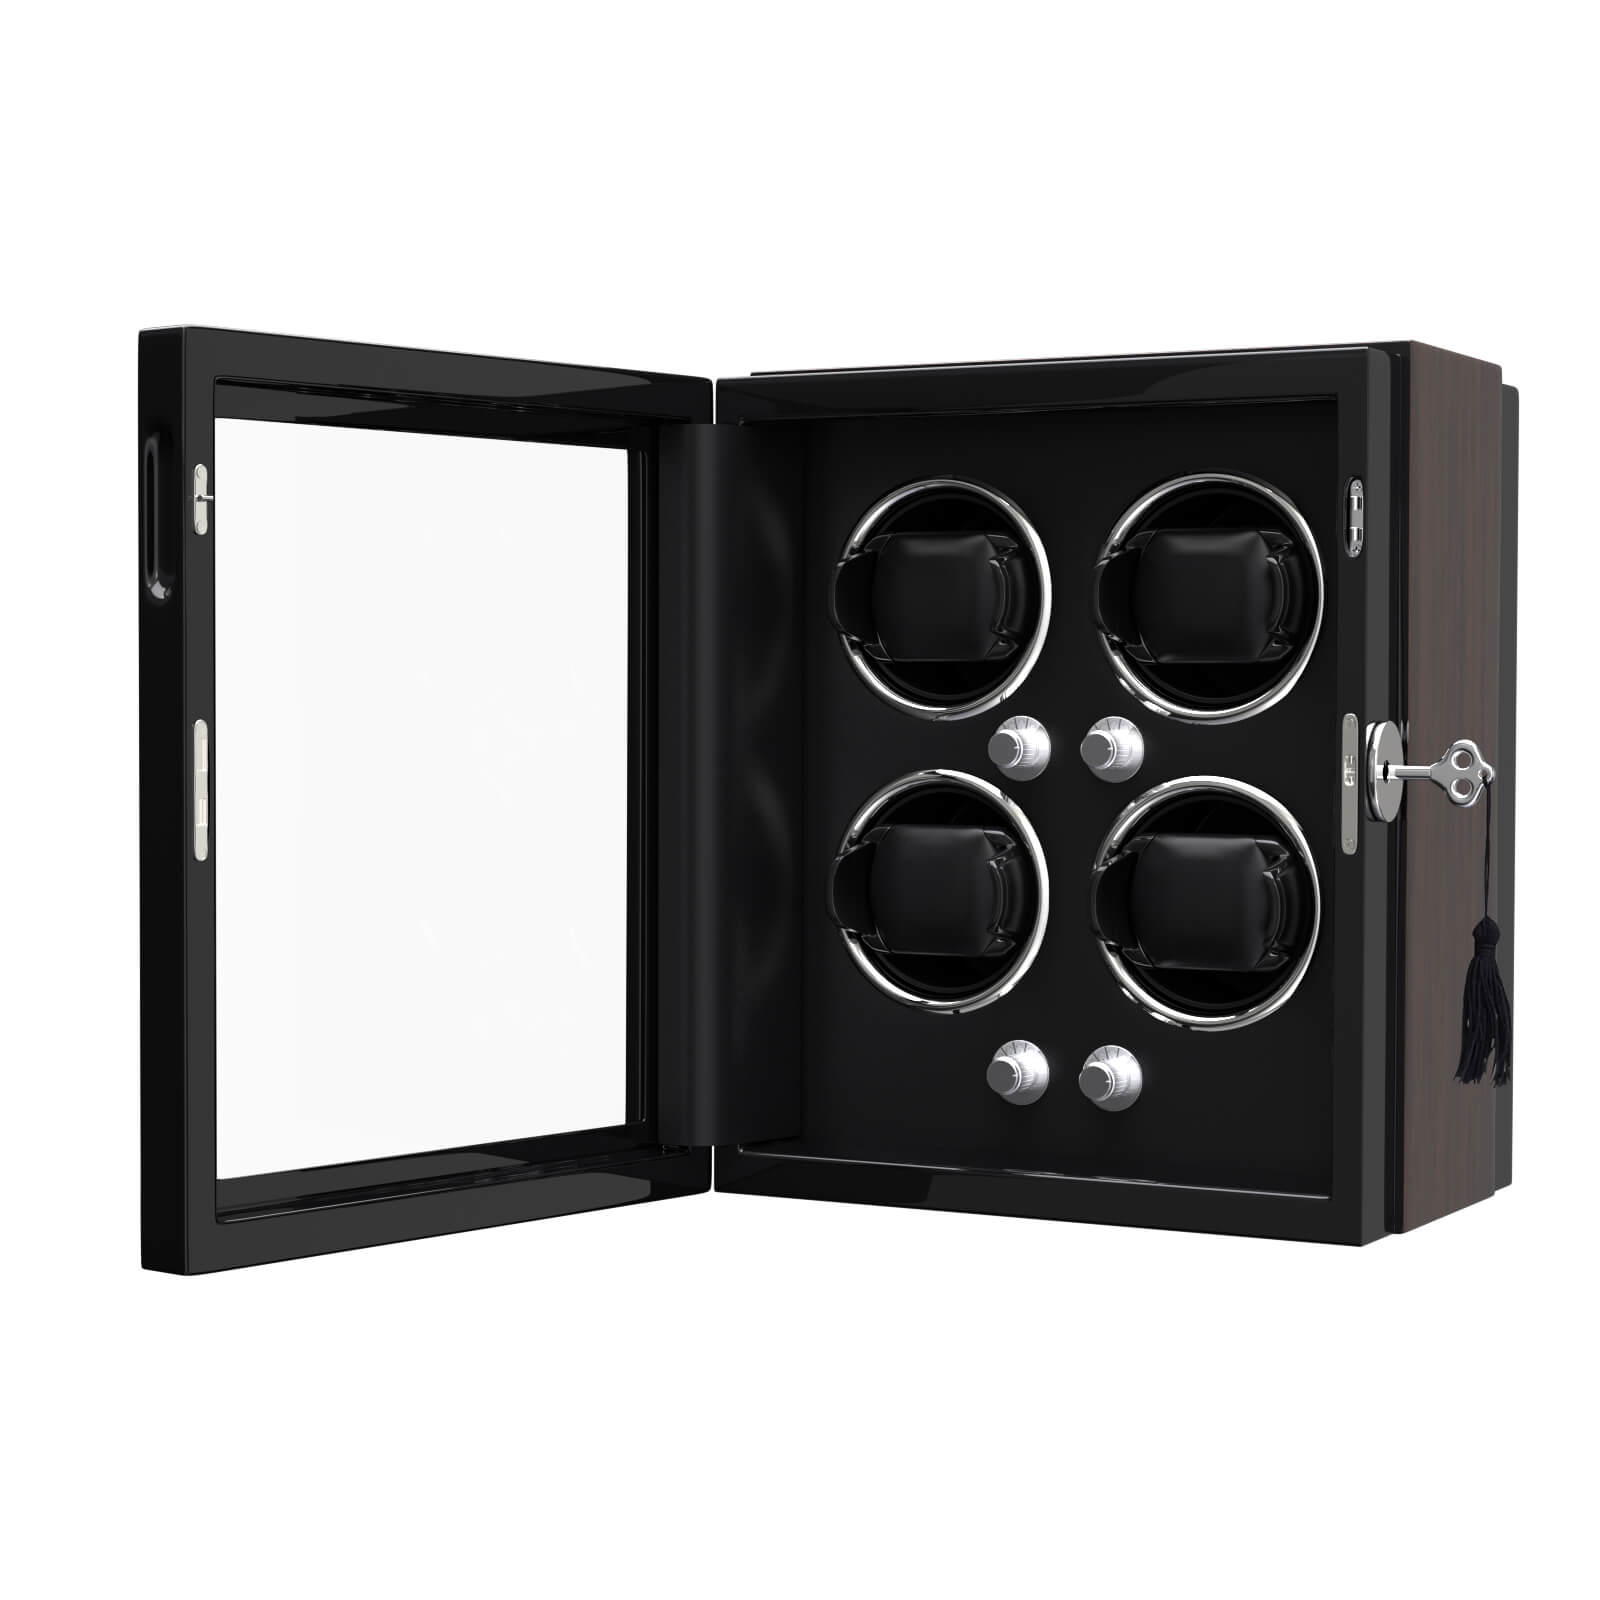 4 Watch Winder for Automatic Watches Quiet Mabuchi Motors with Lock